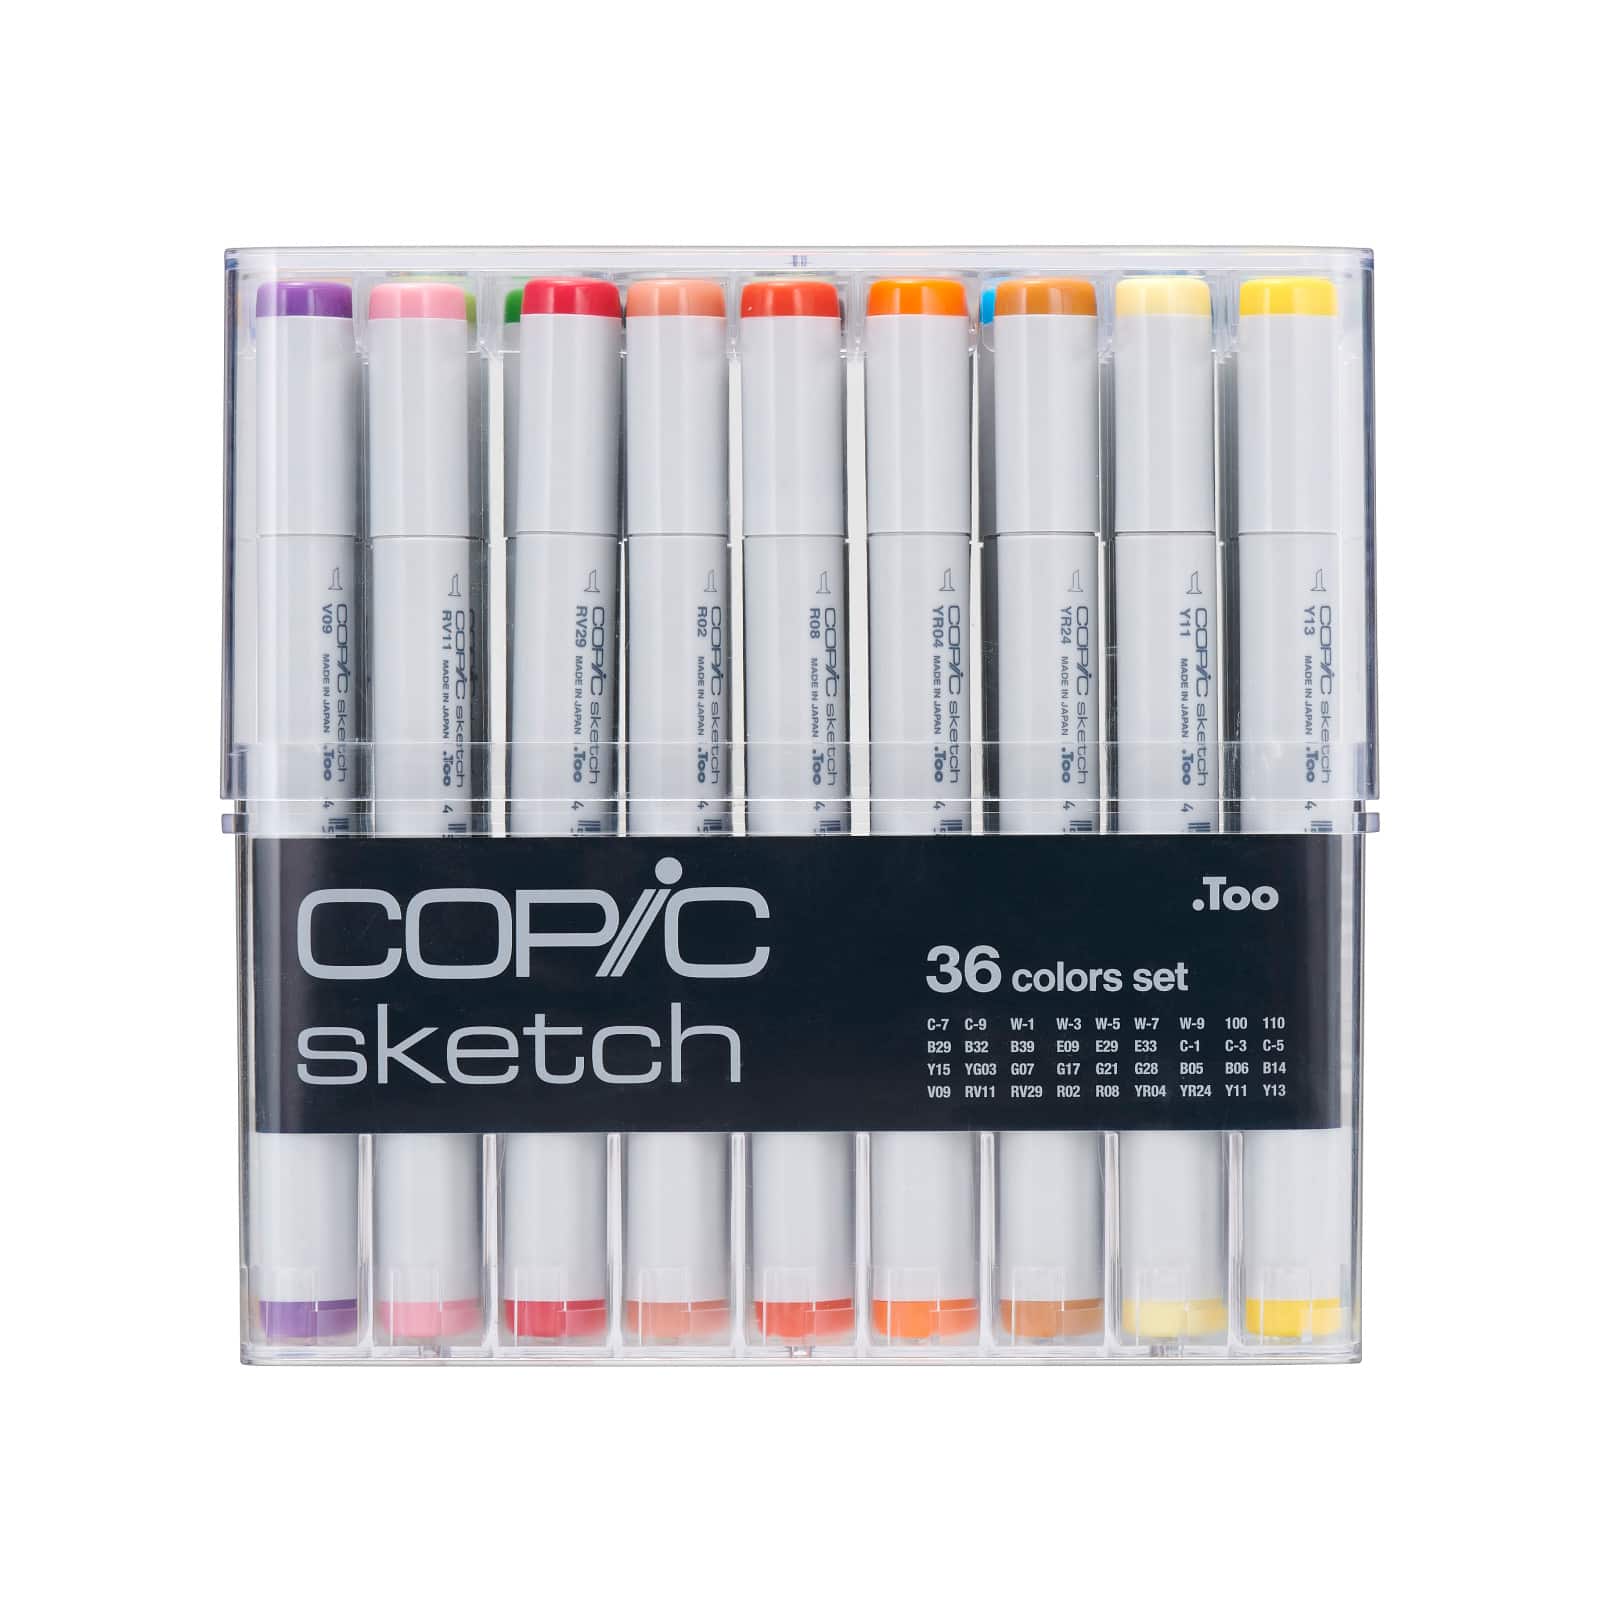 Buy Copic Sketch Marker Storage for Carts m IKEA Raskog Michaels Online in  India  Etsy